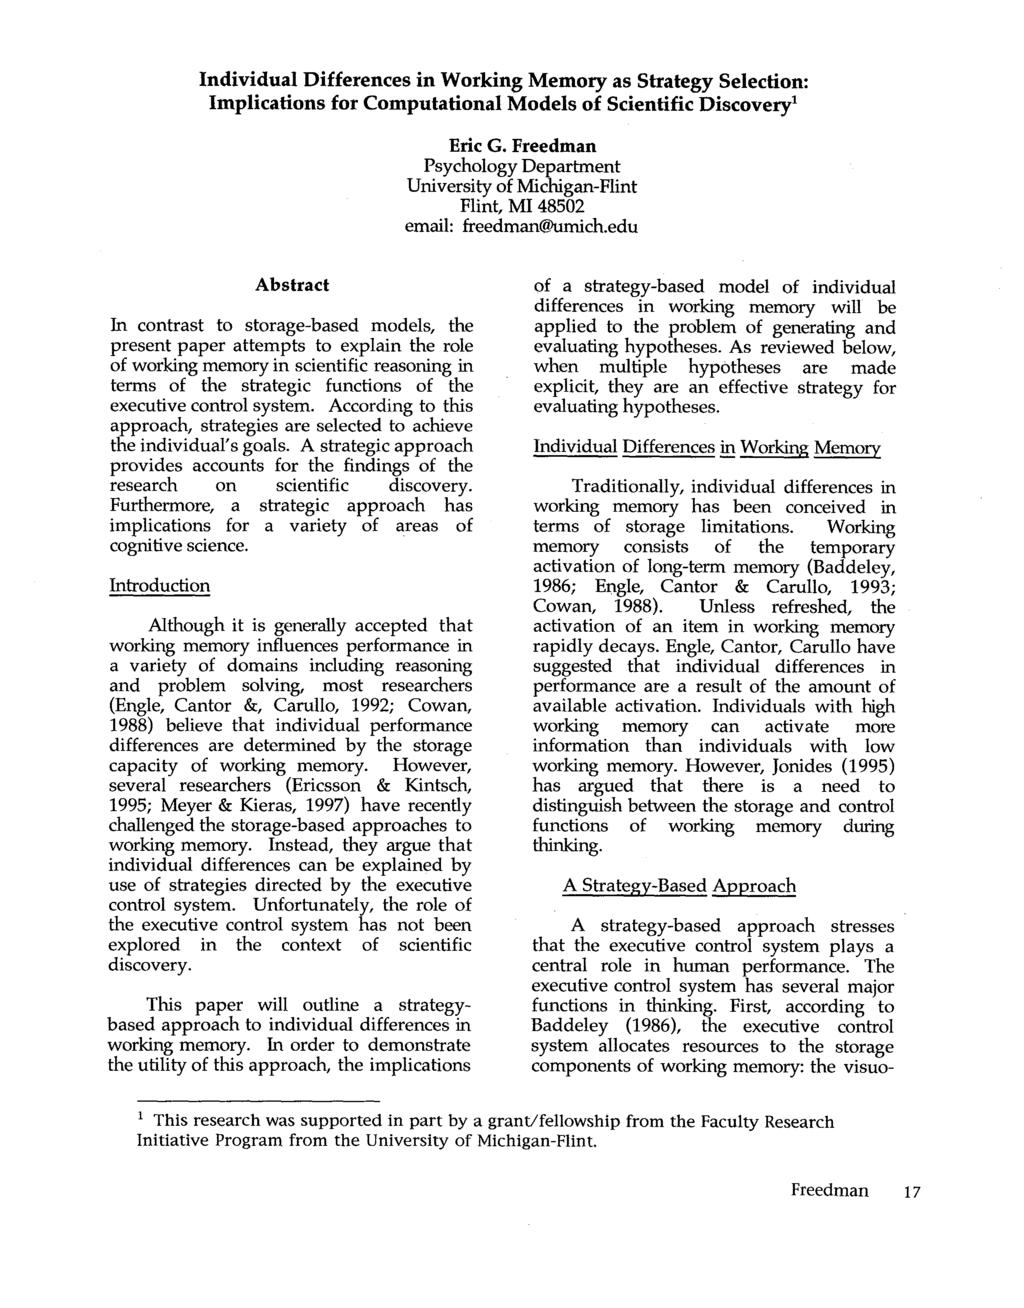 Individual Differences in Working Memory as Strategy Selection: Implications 1 for Computational Models of Scientific Discovery From:MAICS-98 Proceedings. Copyright 1998, AAAI (www.aaai.org).